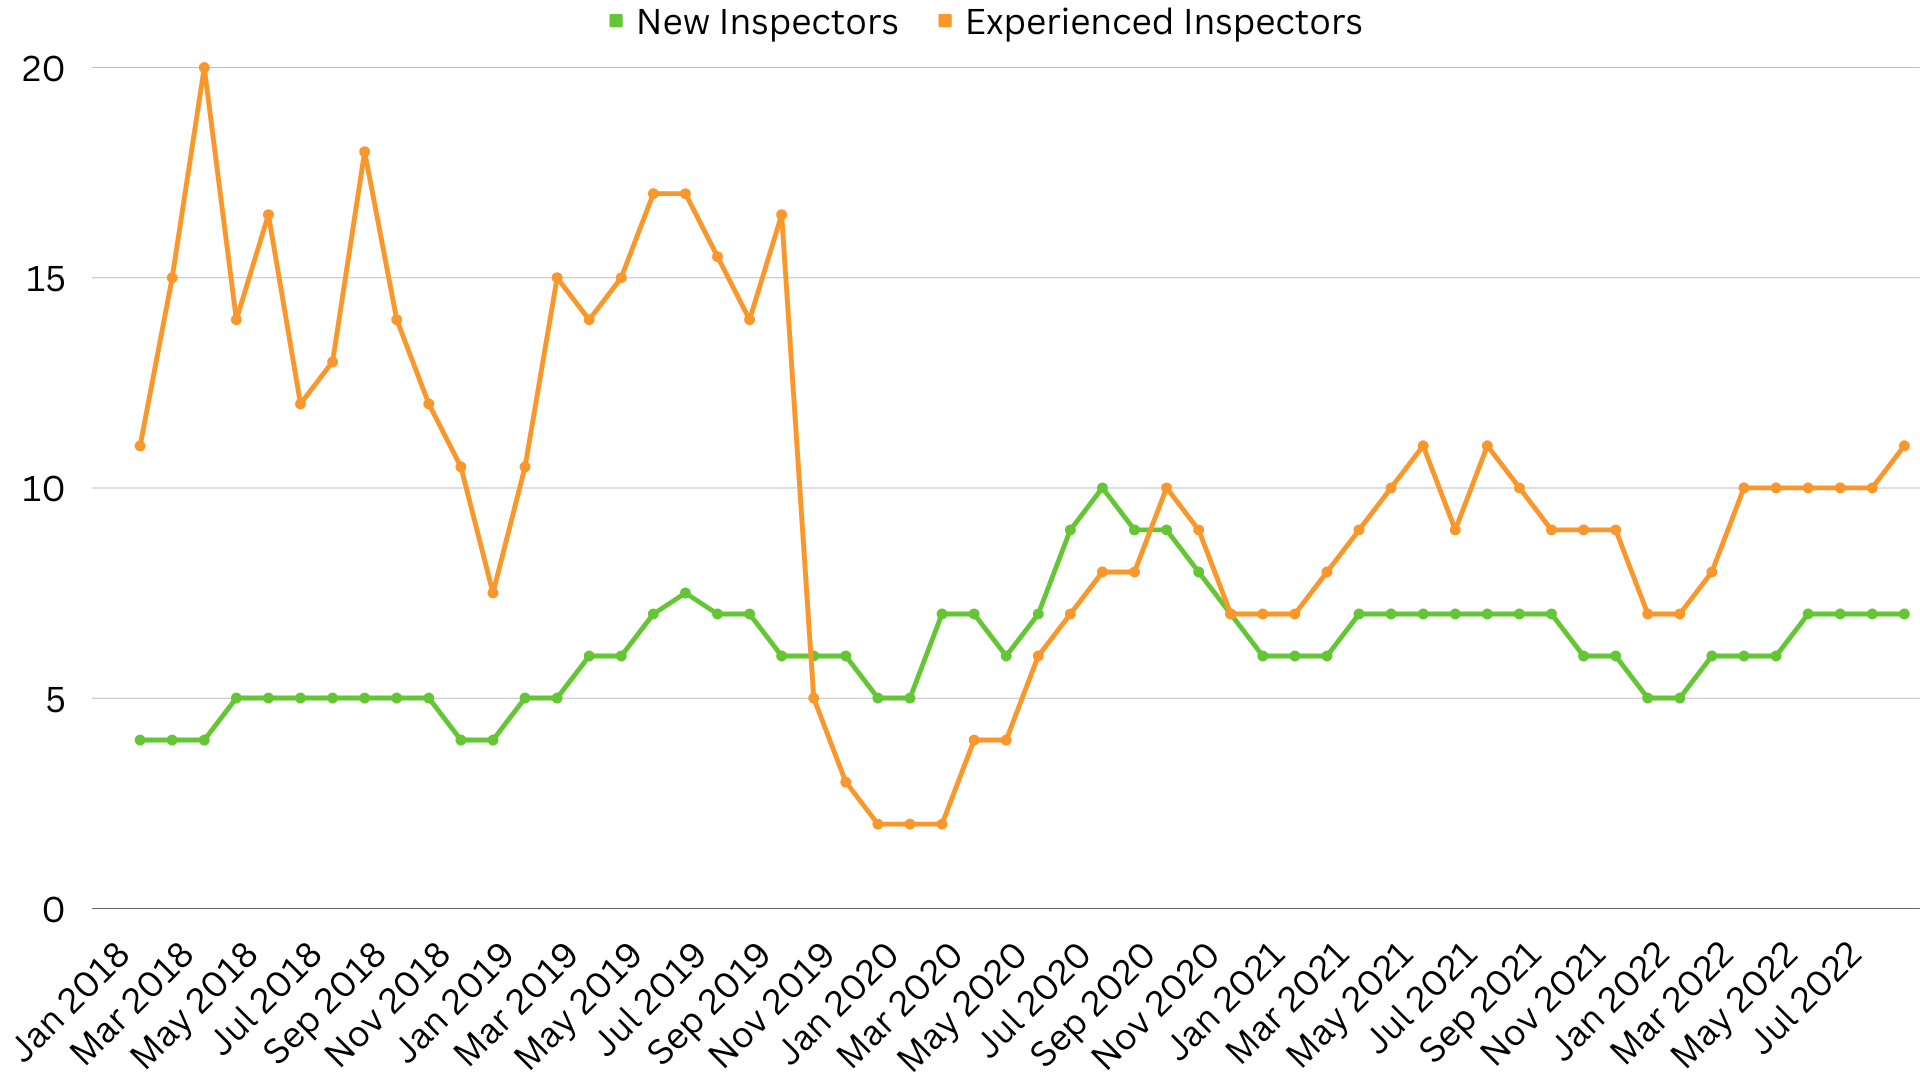 Average monthly home inspections for new and experience inspectors